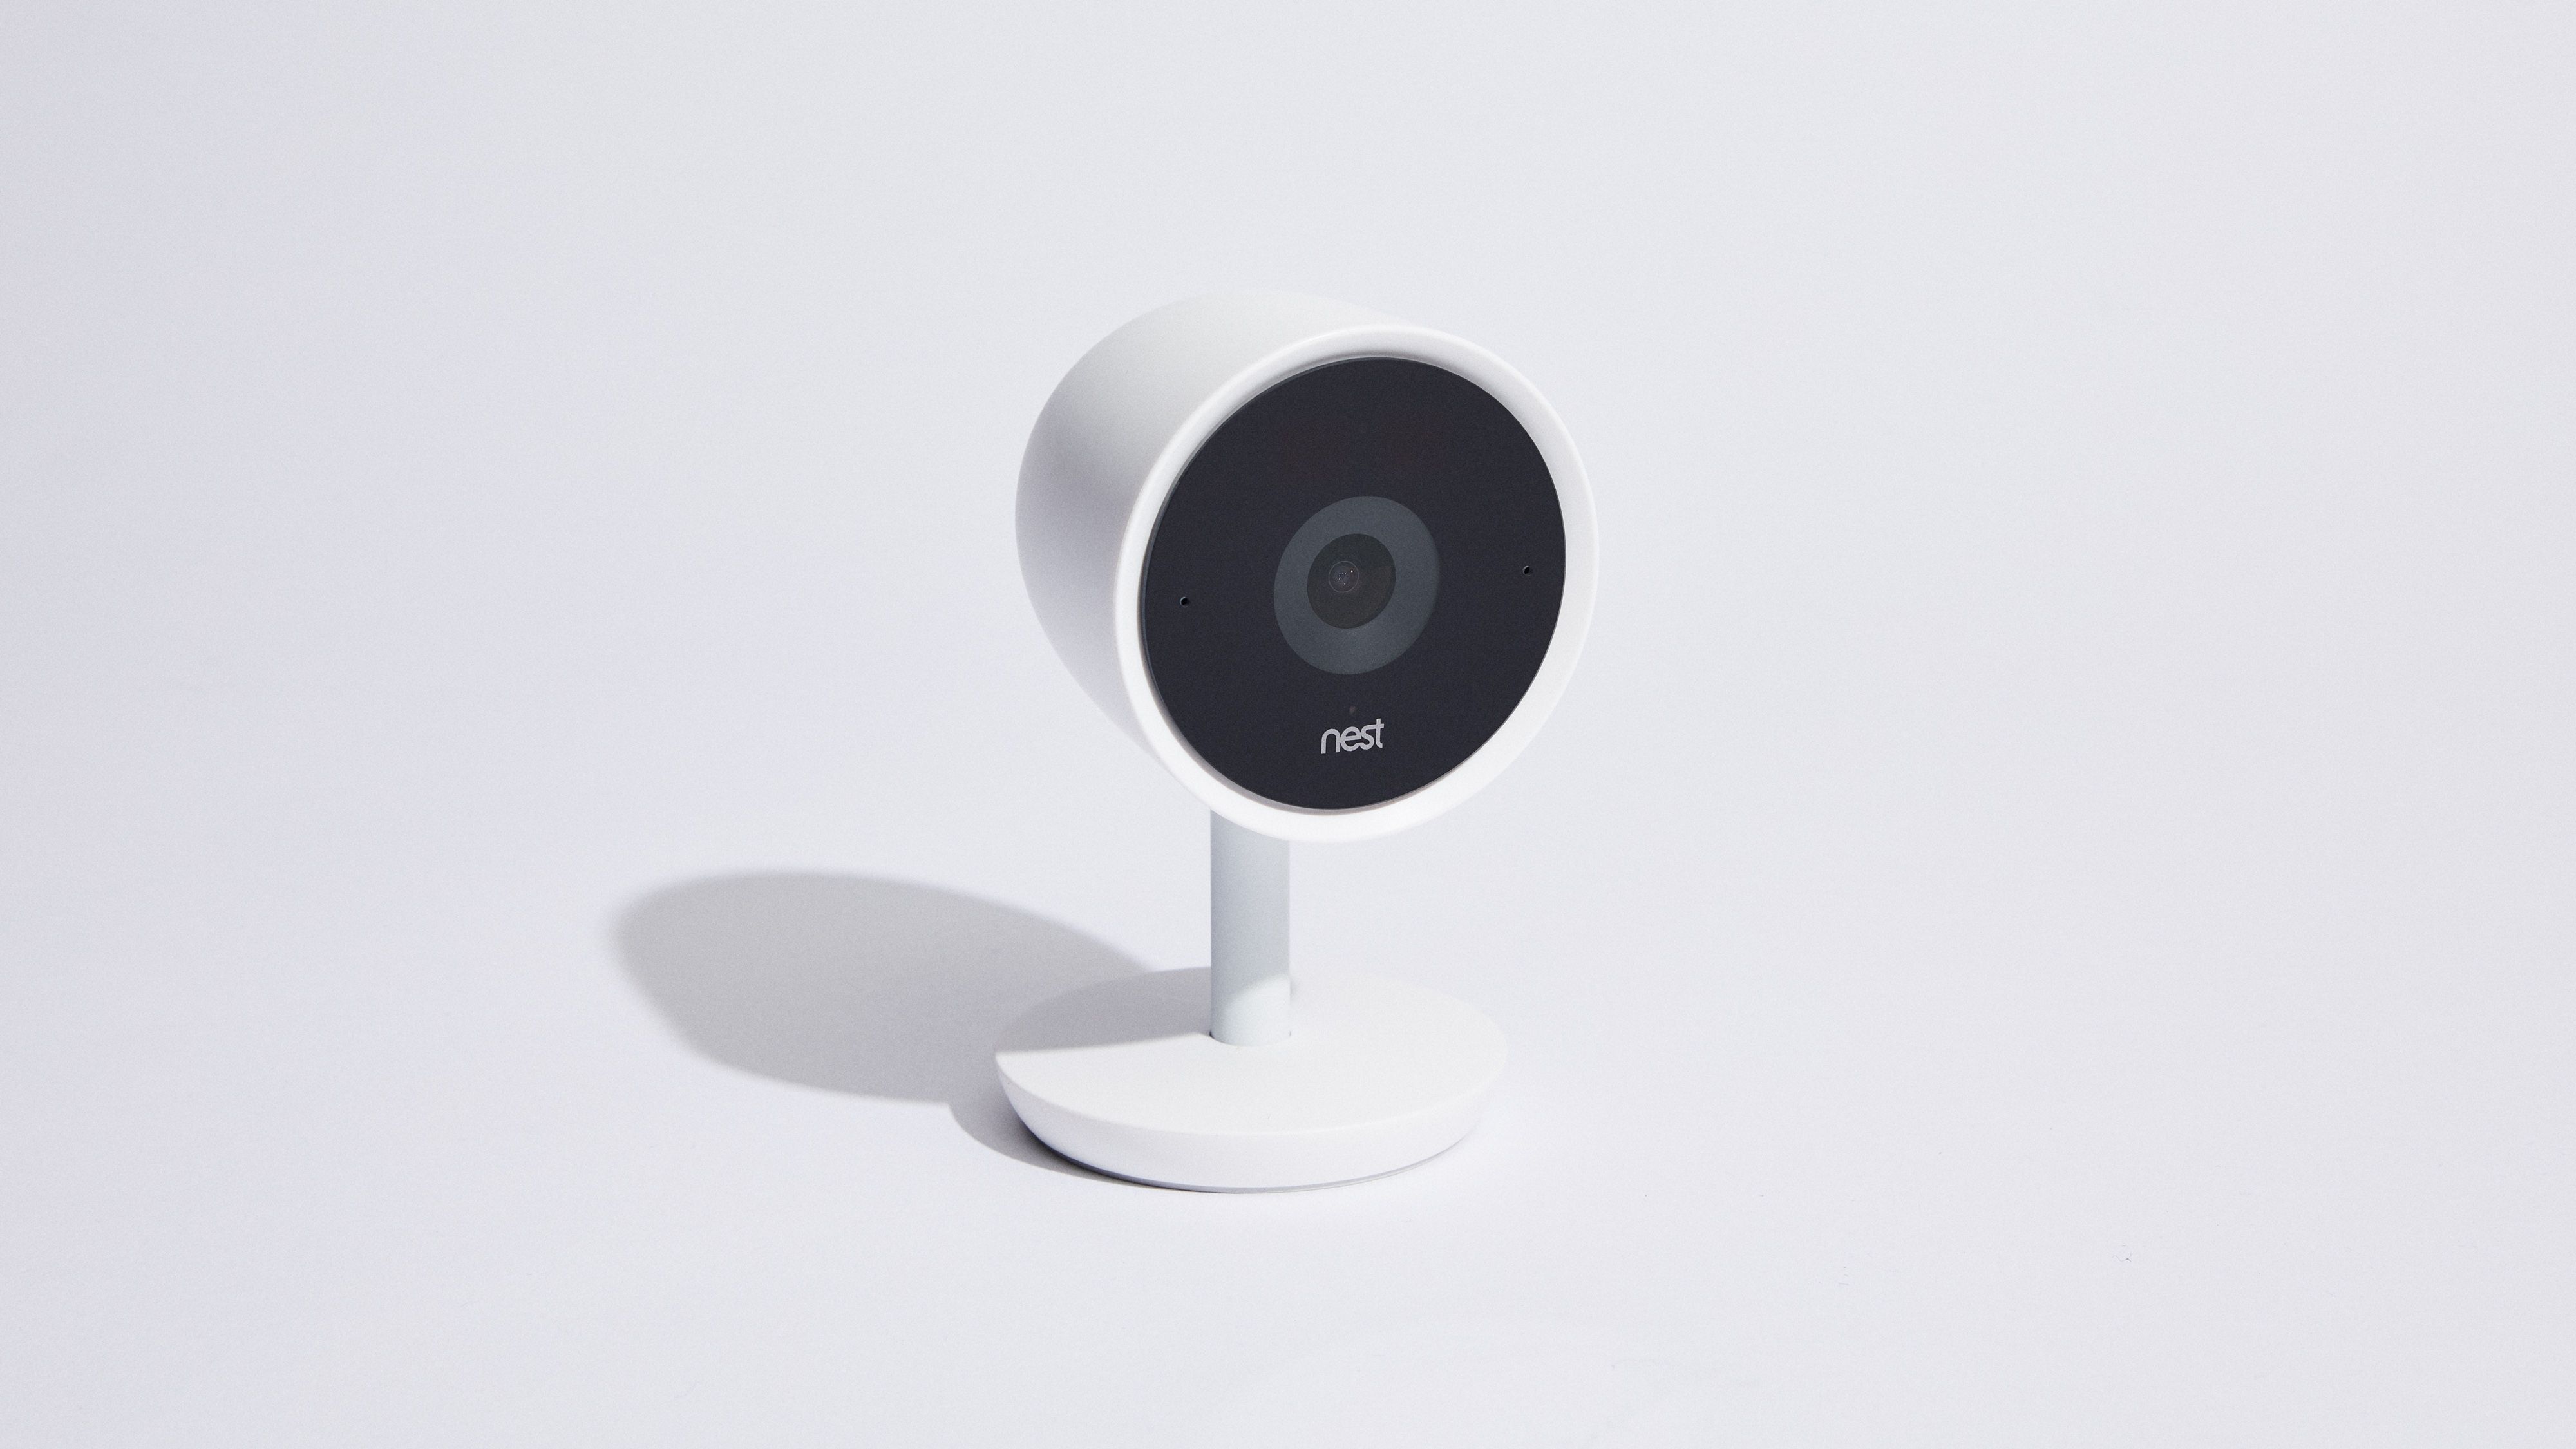 Nest Cam Wired review: The indoor security camera to get — if you